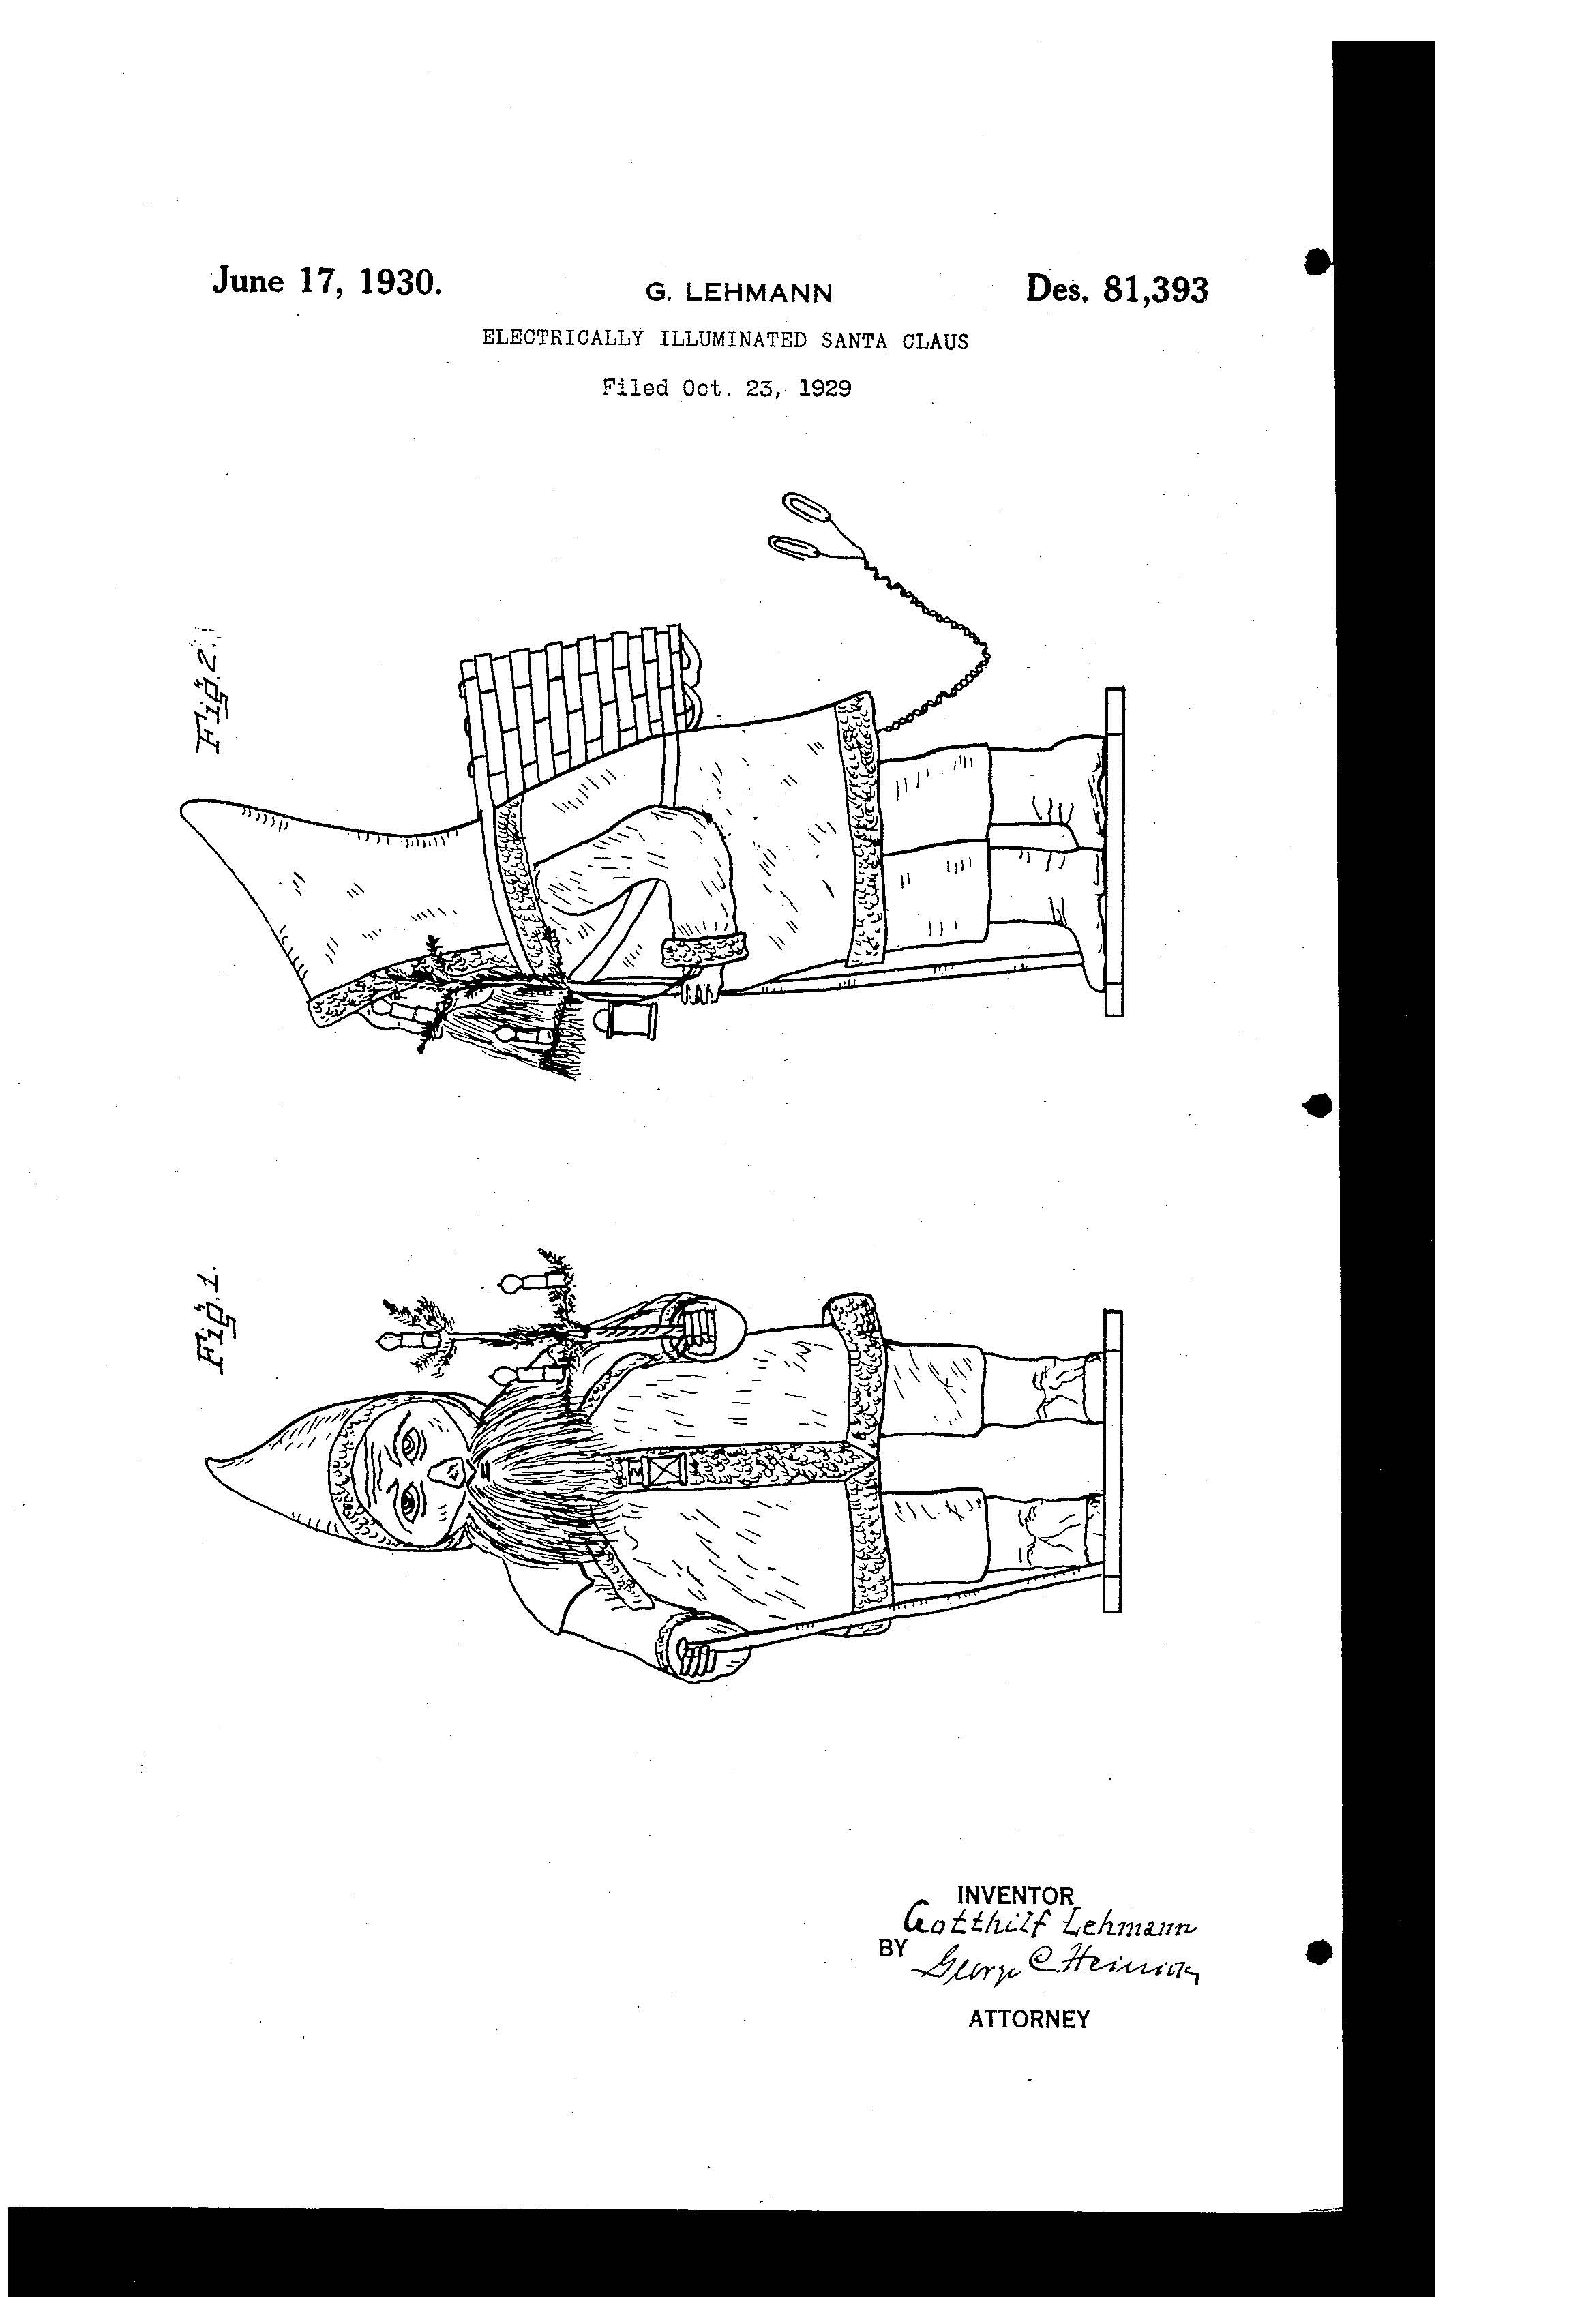 usd81393_fig_page_1